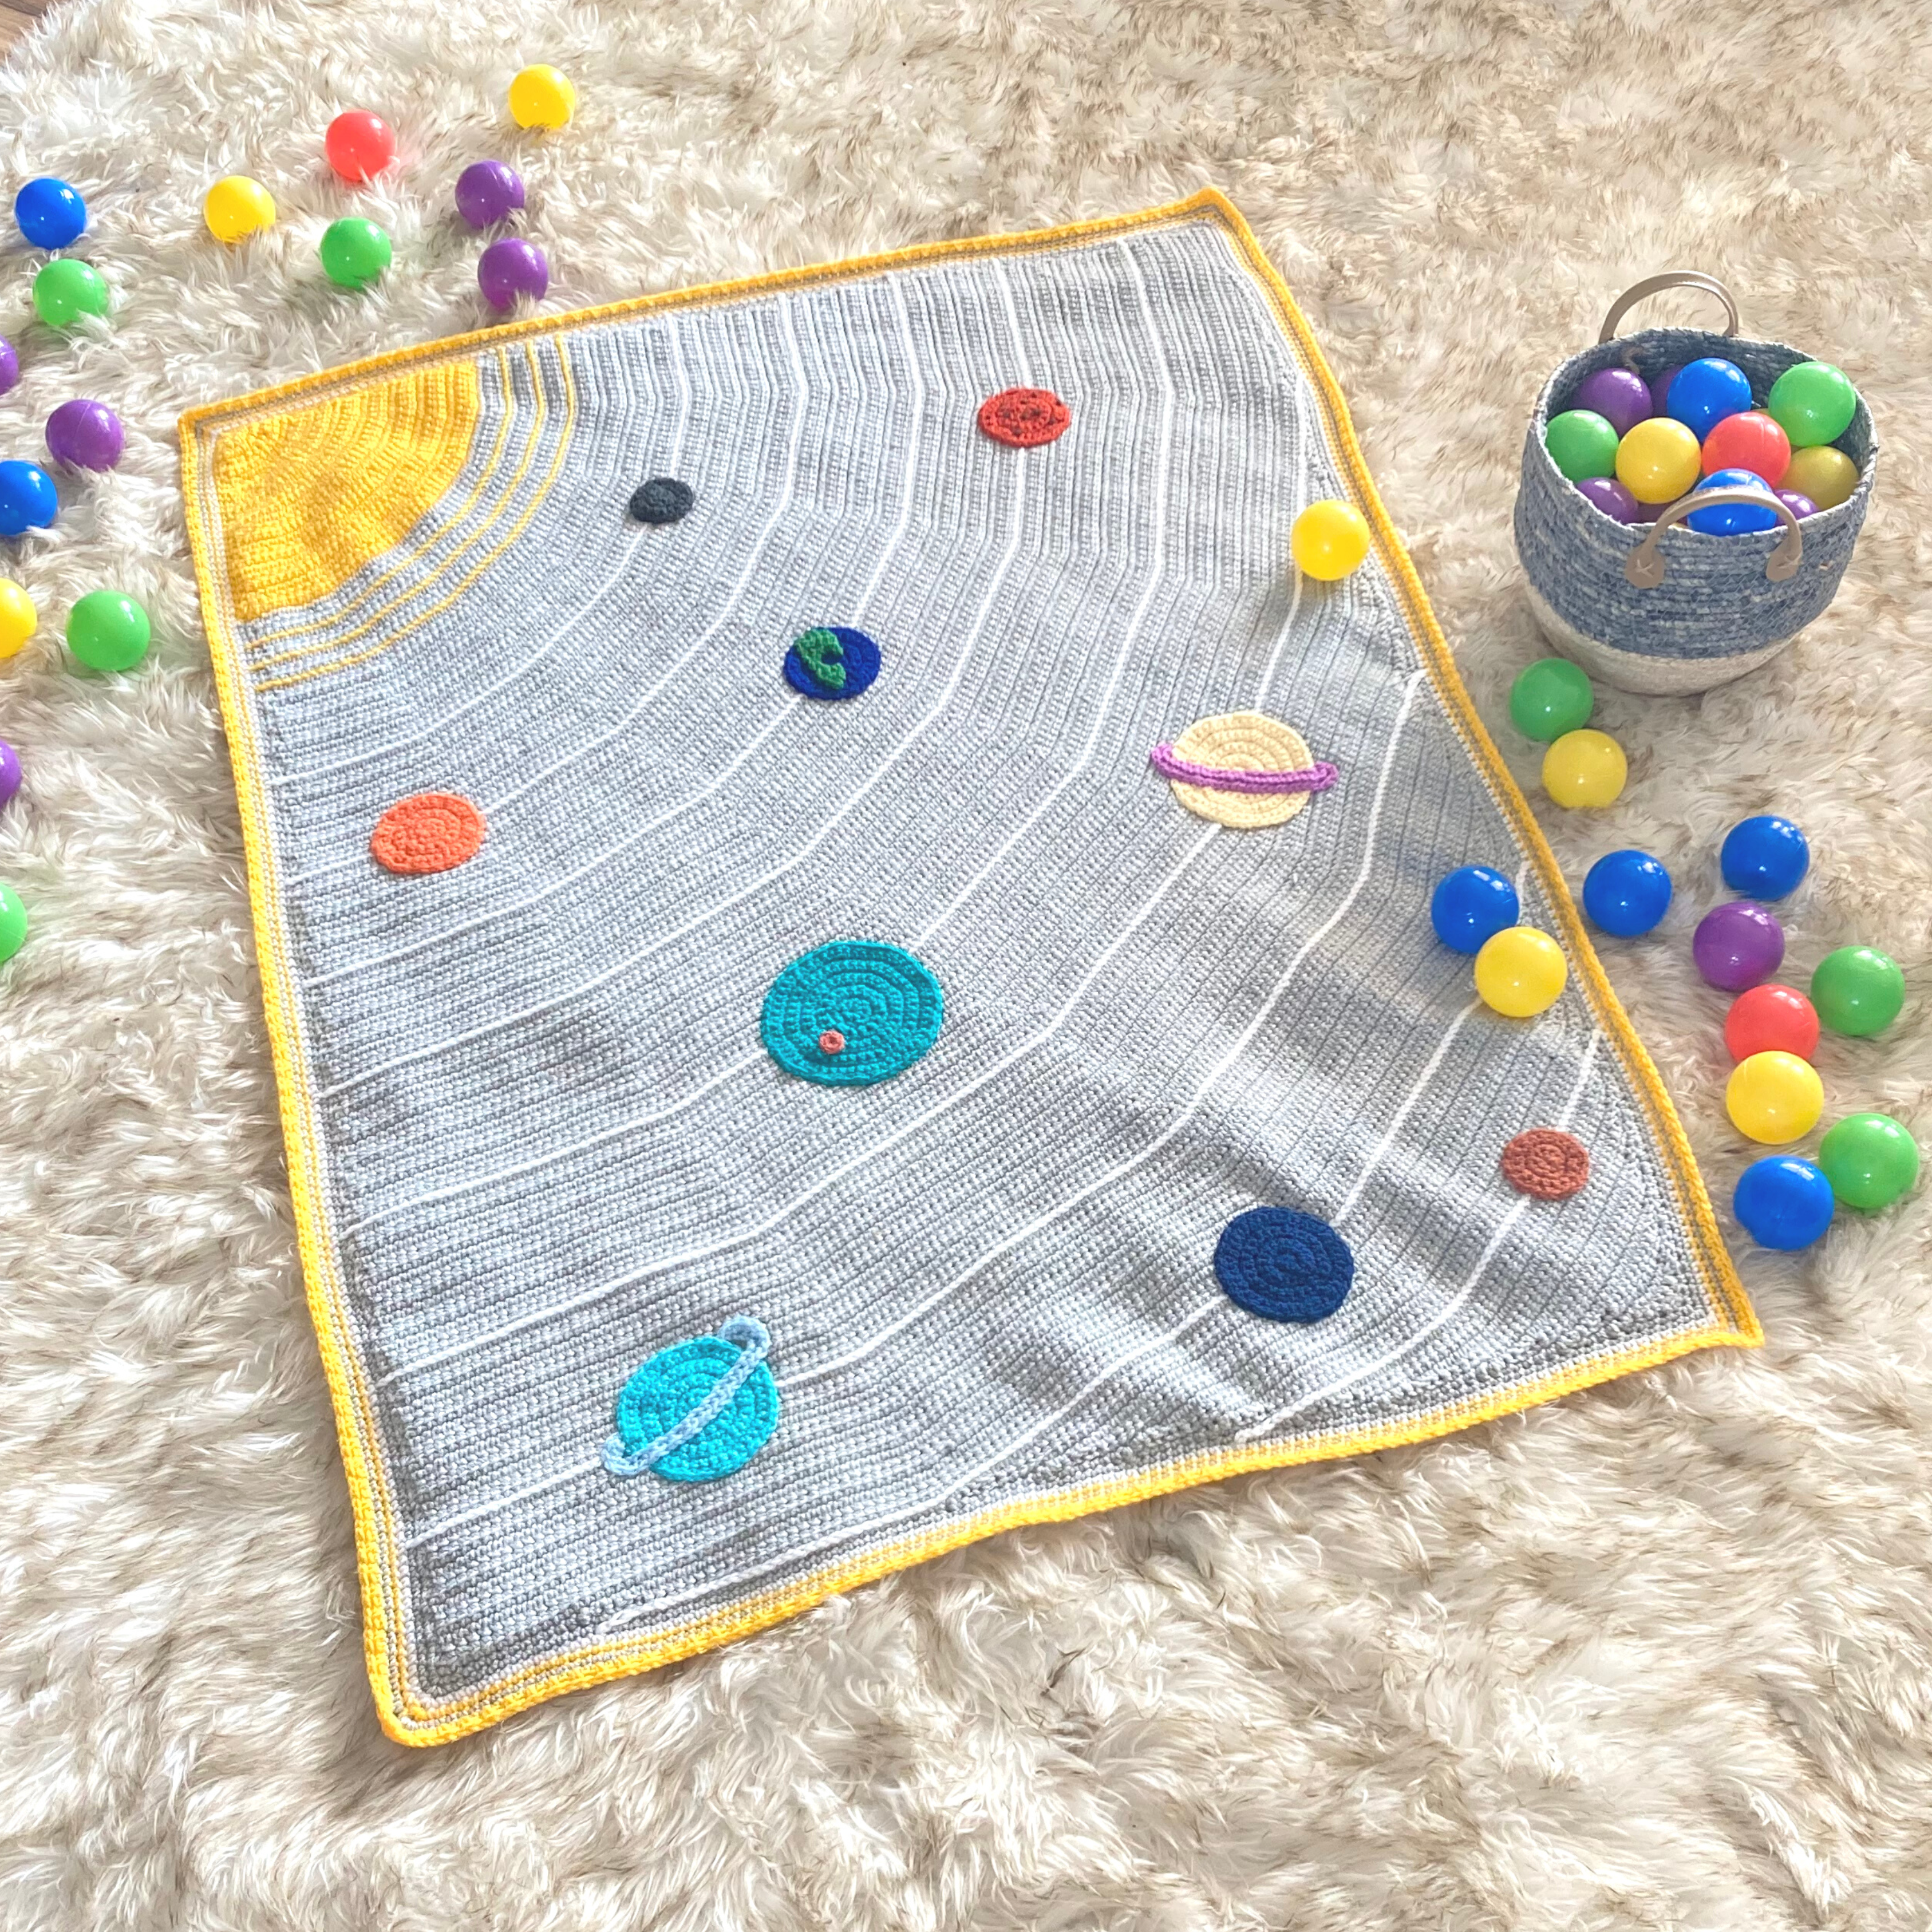 Read more about the article Space Crochet Blanket with Planets